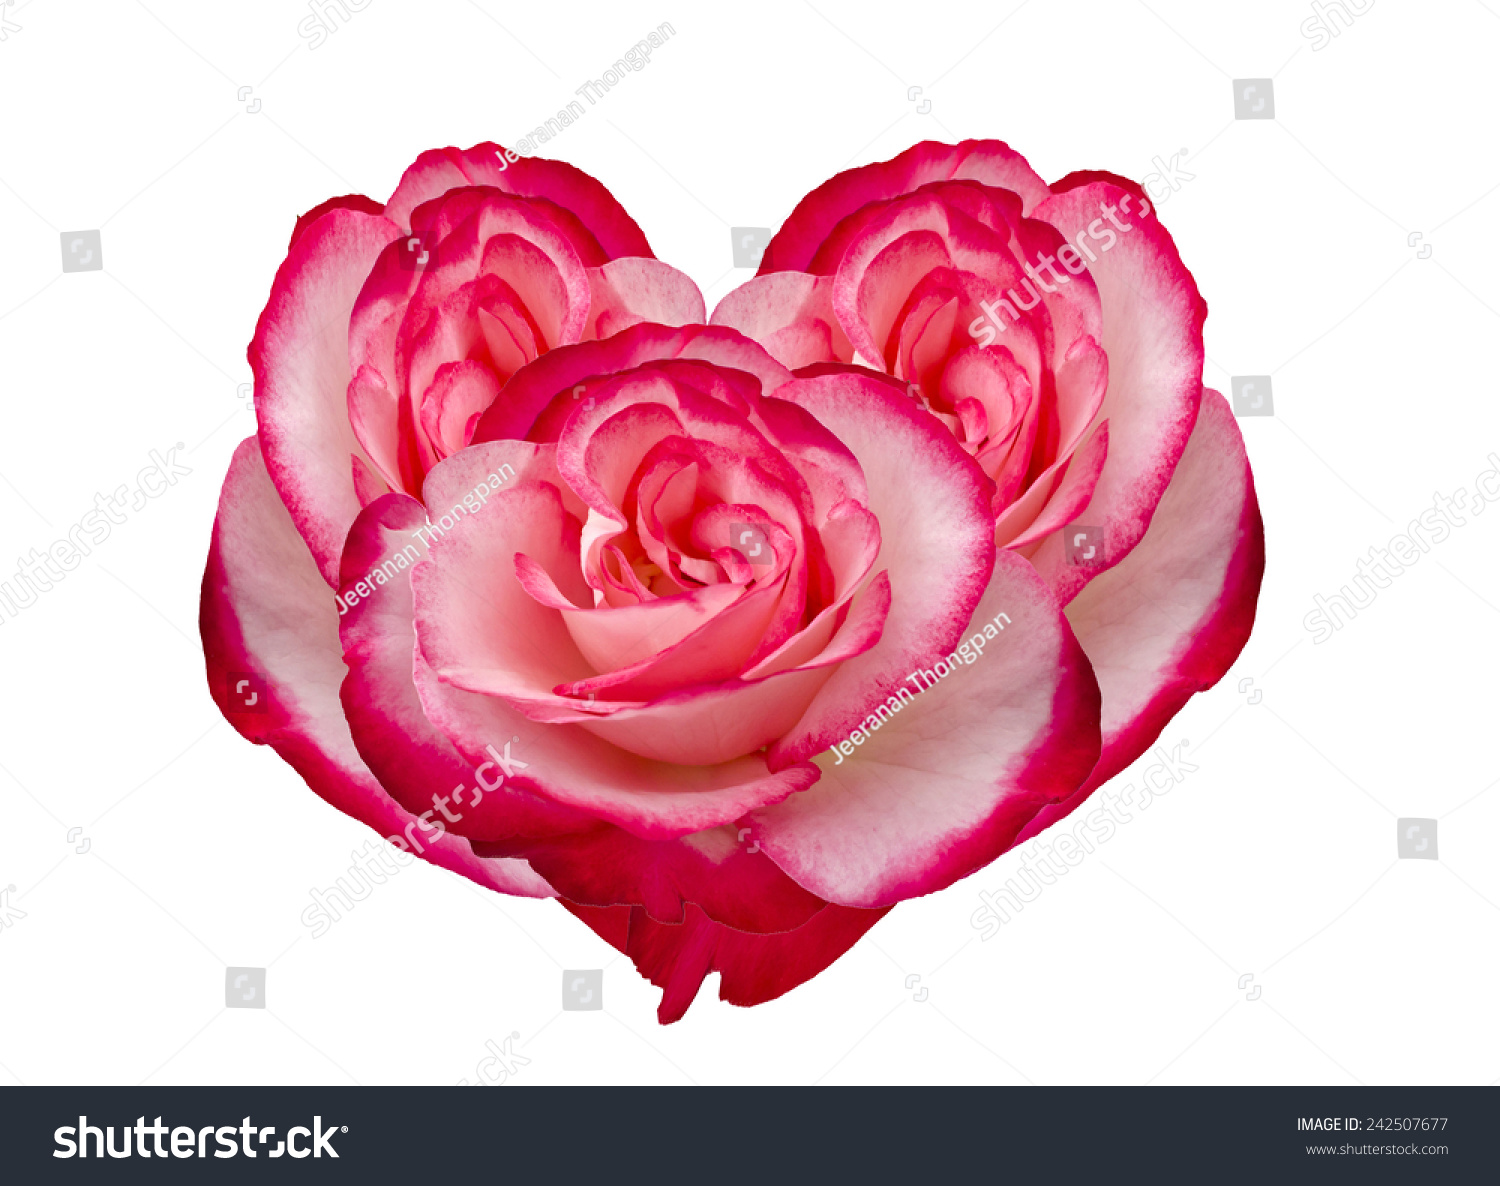 Damask Rose Heart Frame Isolated On Stock Photo Edit Now 242507677